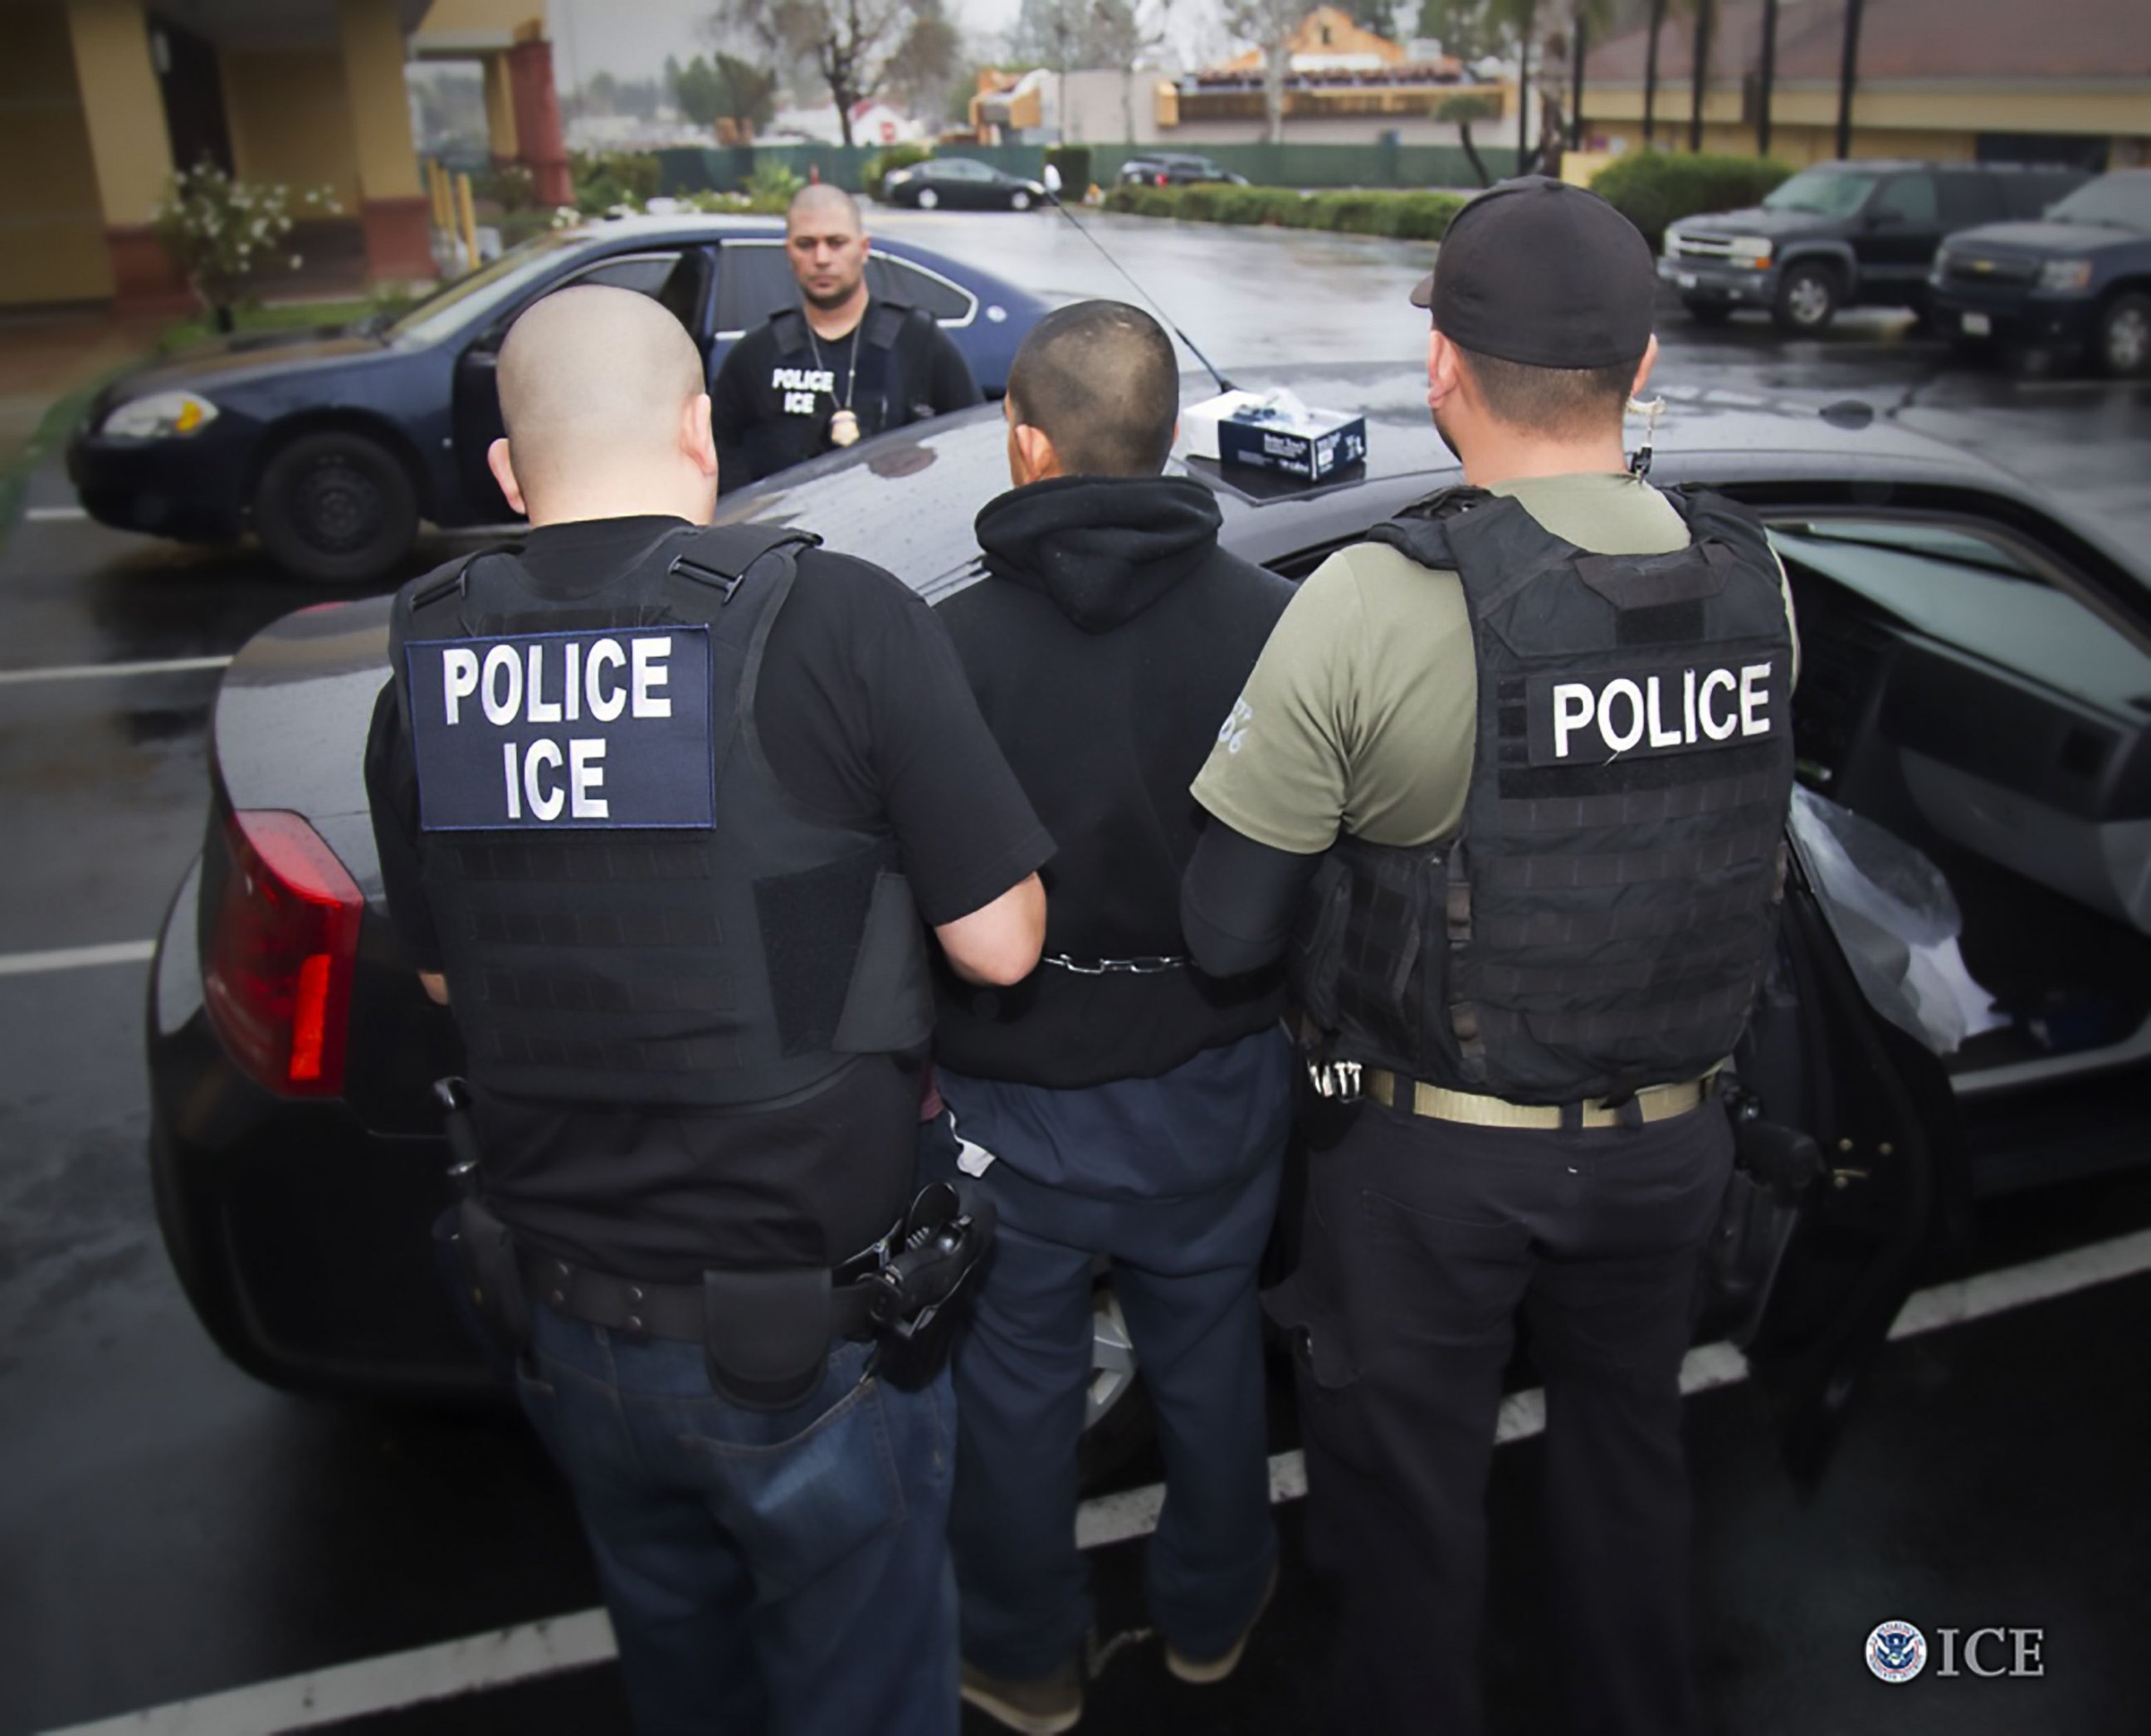 PHOTO: This image obtained Feb. 11, 2017 courtesy of the Immigration and Customs Enforcement (ICE) shows U.S. Immigration and Customs Enforcement officers detaining a suspect during an enforcement operation on Feb. 7, 2017 in Los Angeles.  
